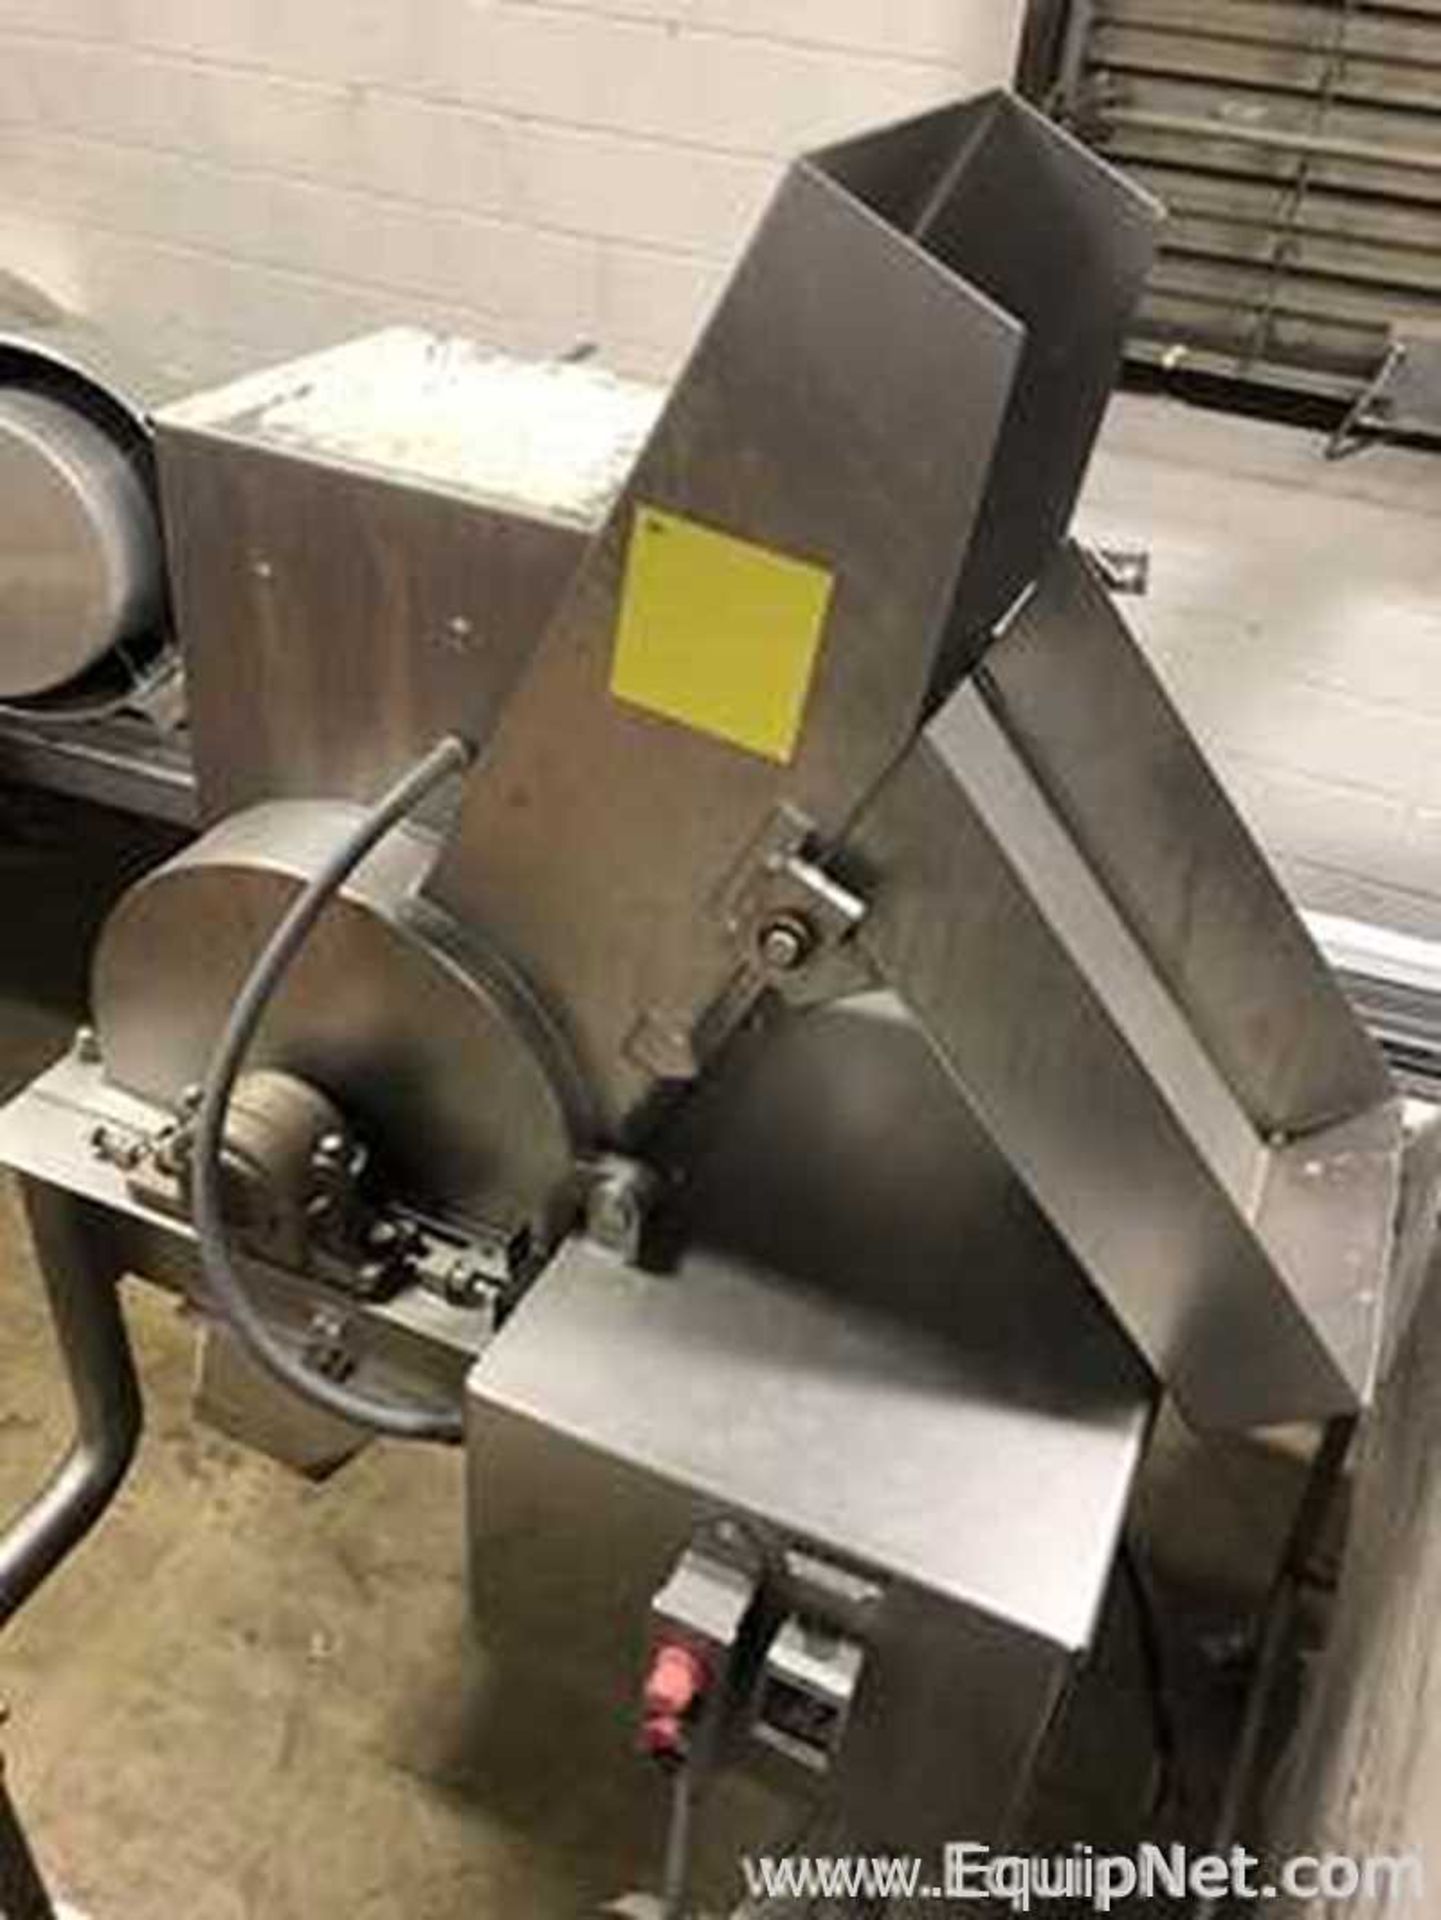 Shredder or Dicer for Cheese Processing - Image 2 of 9